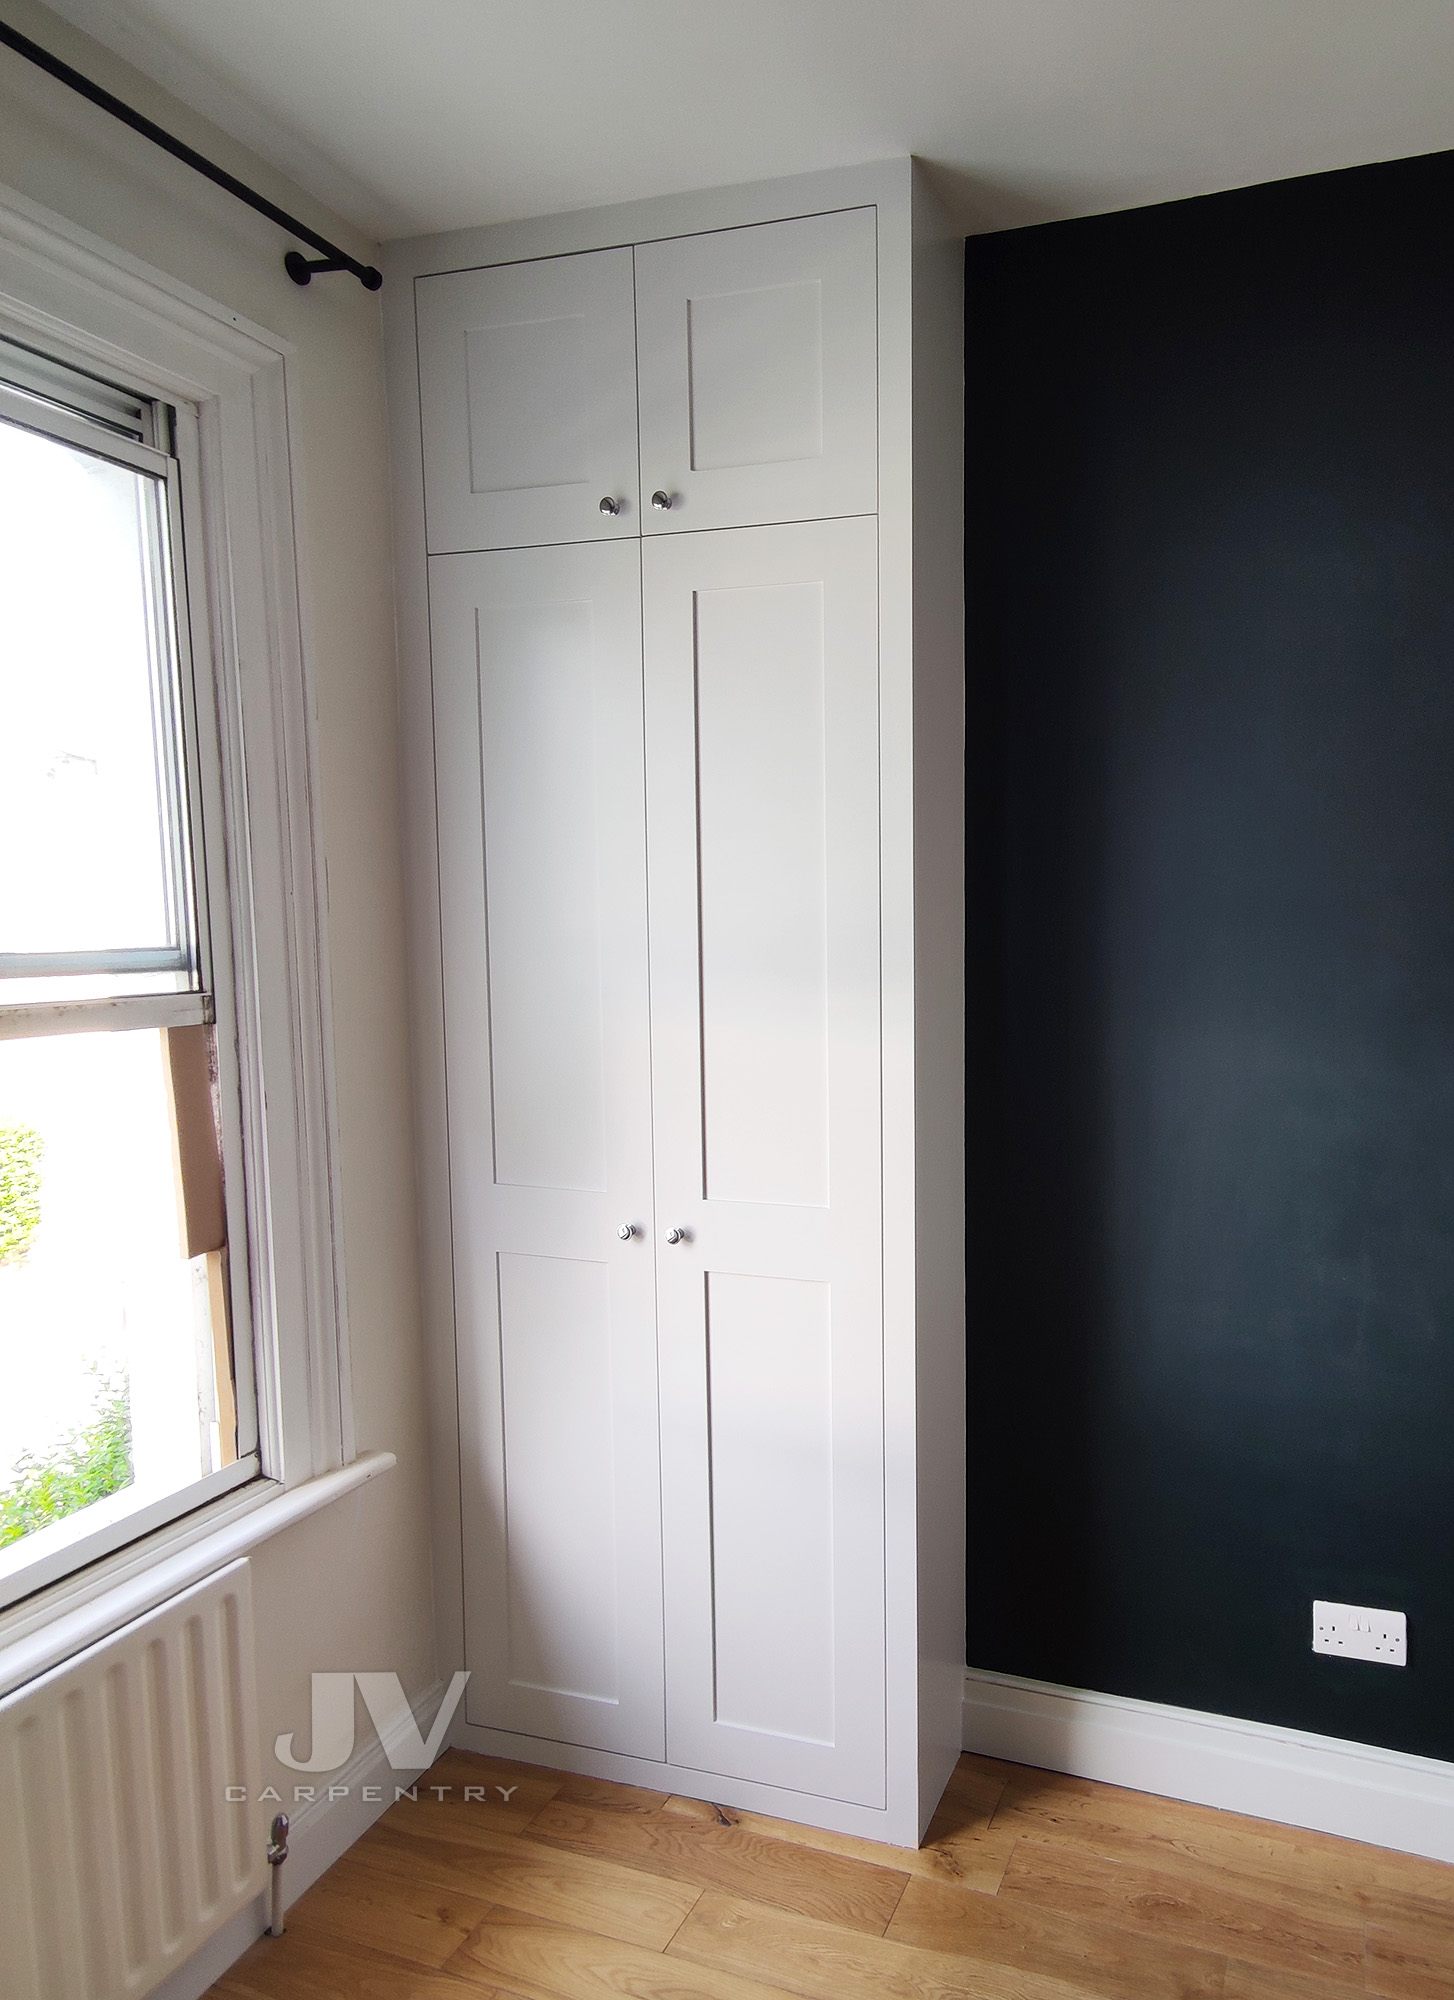 fitted wardrobe in an alcove by the window